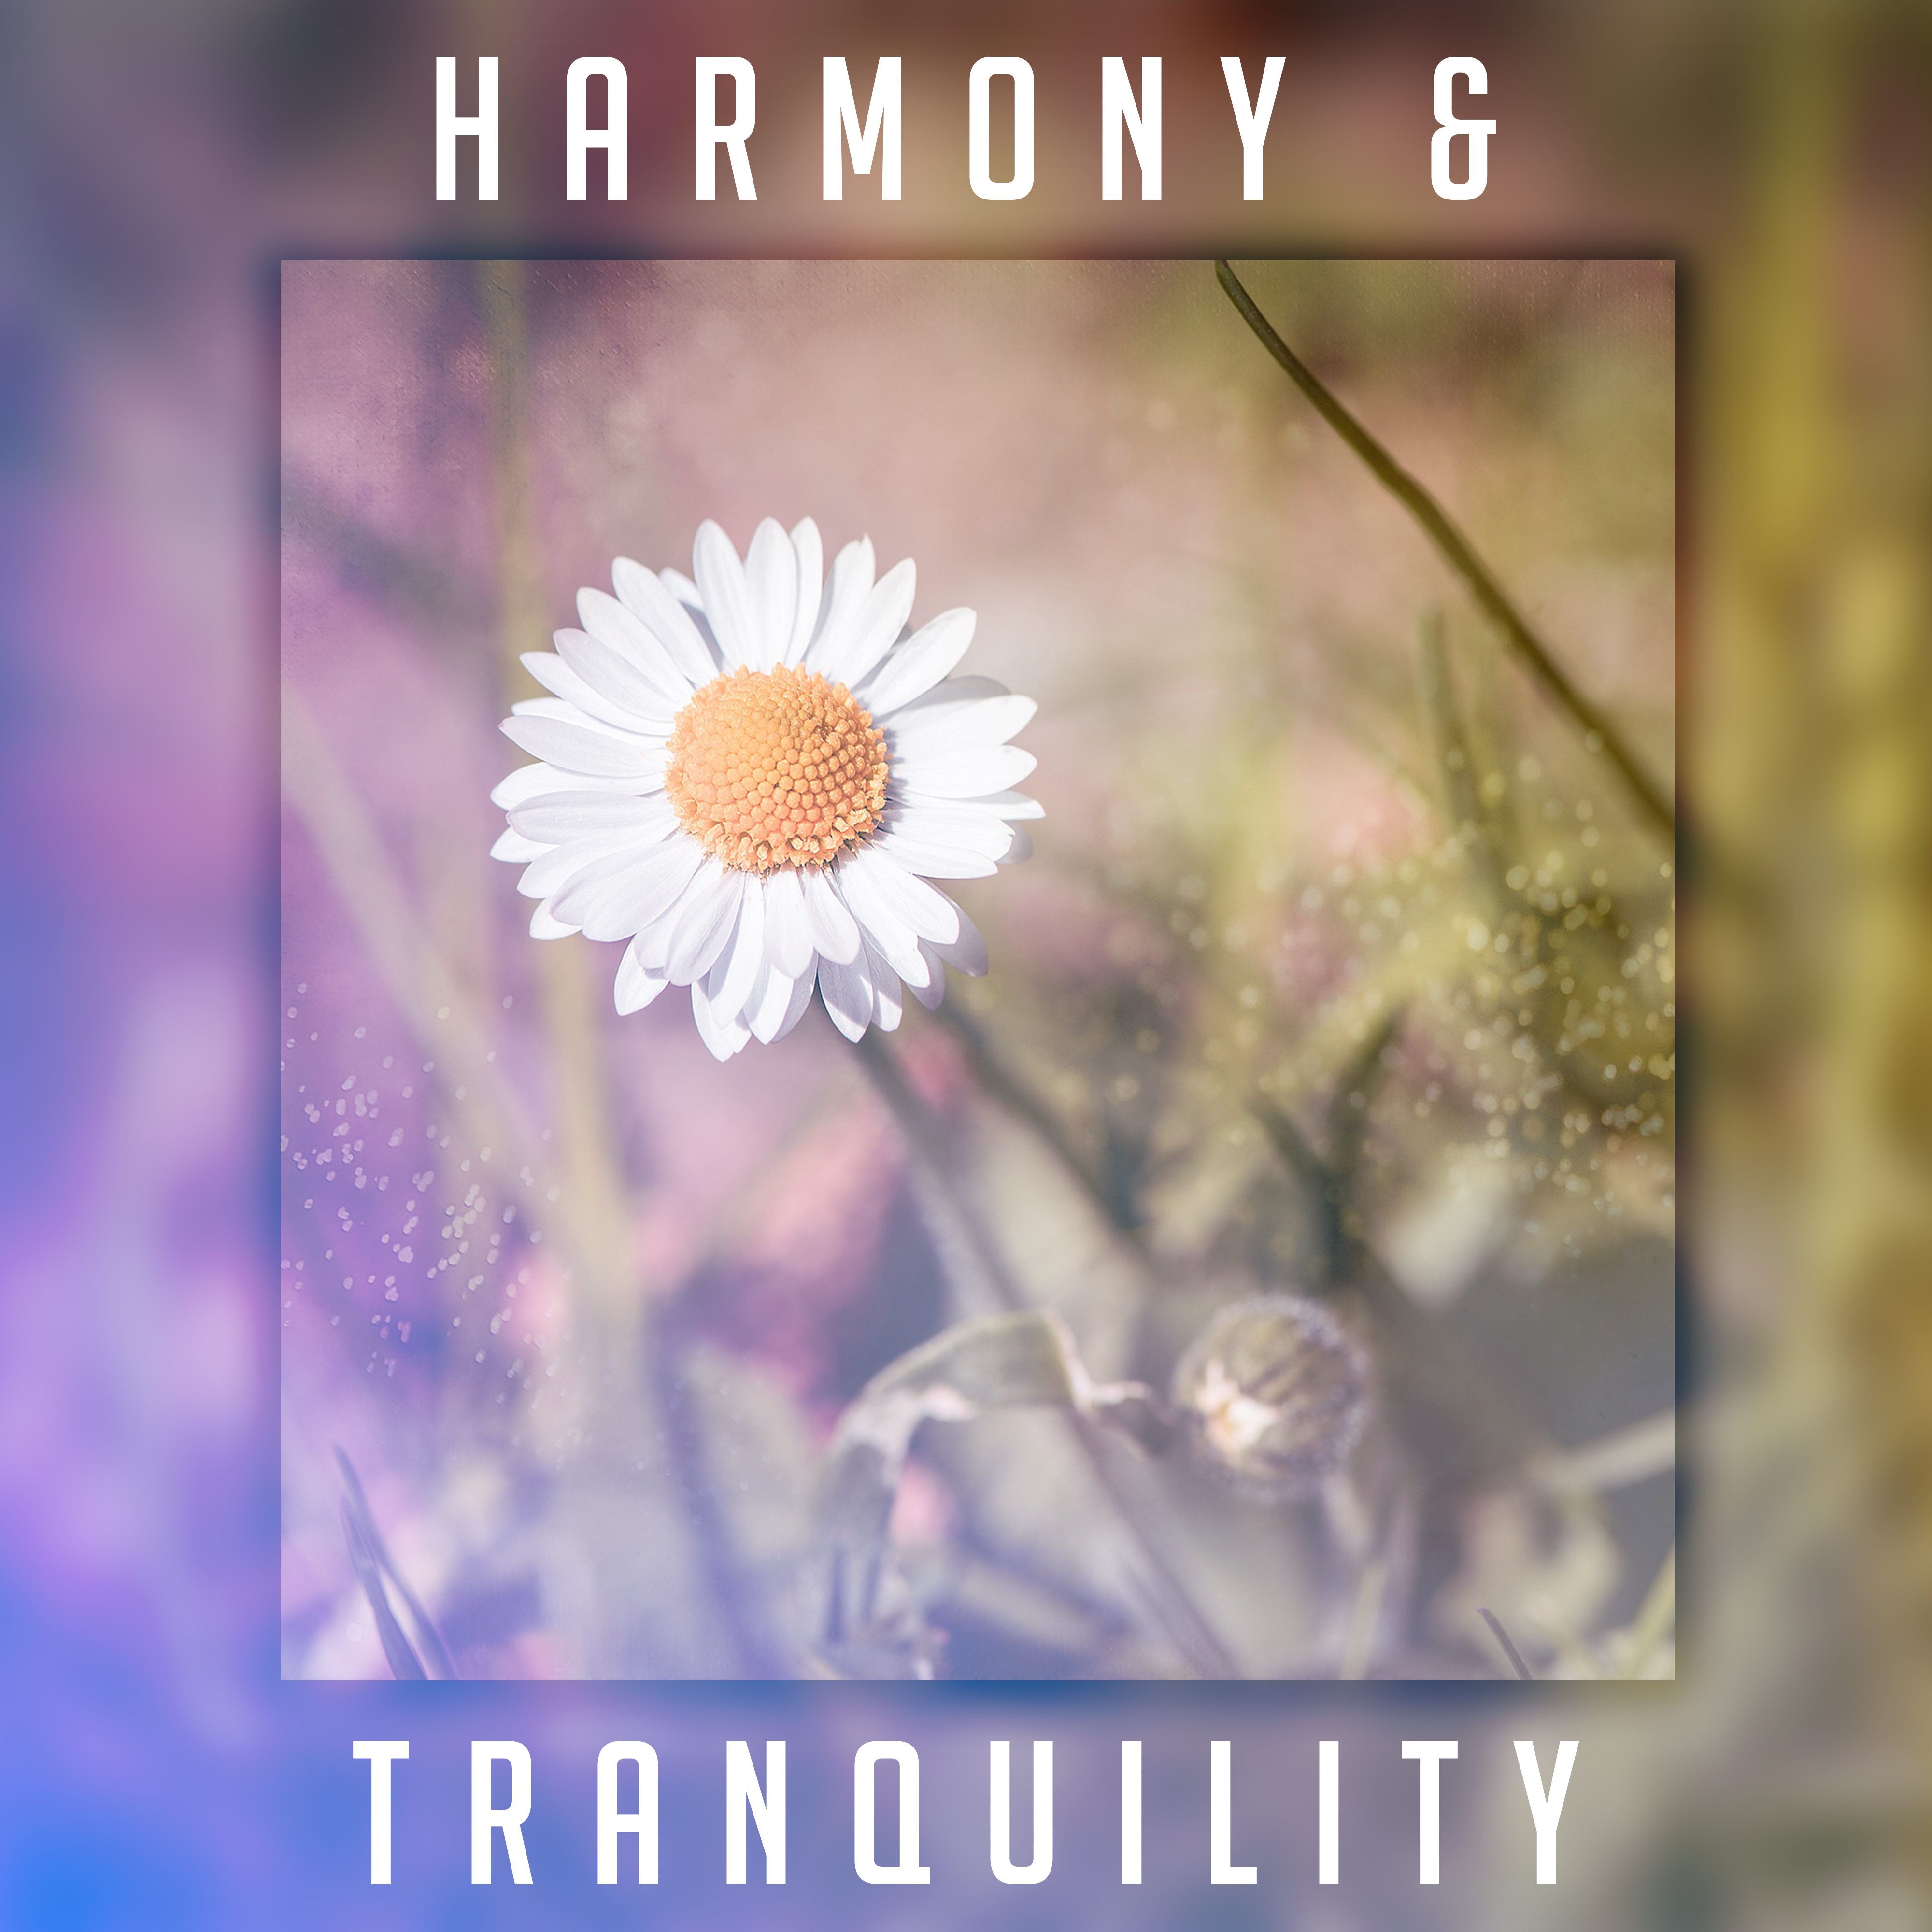 Harmony  Tranquility  Peaceful Music for Relaxation, Healing, Sounds of Water, Relaxing Waves, Inner Calmness, Pure Sleep, Calm Mind, Nature Sounds